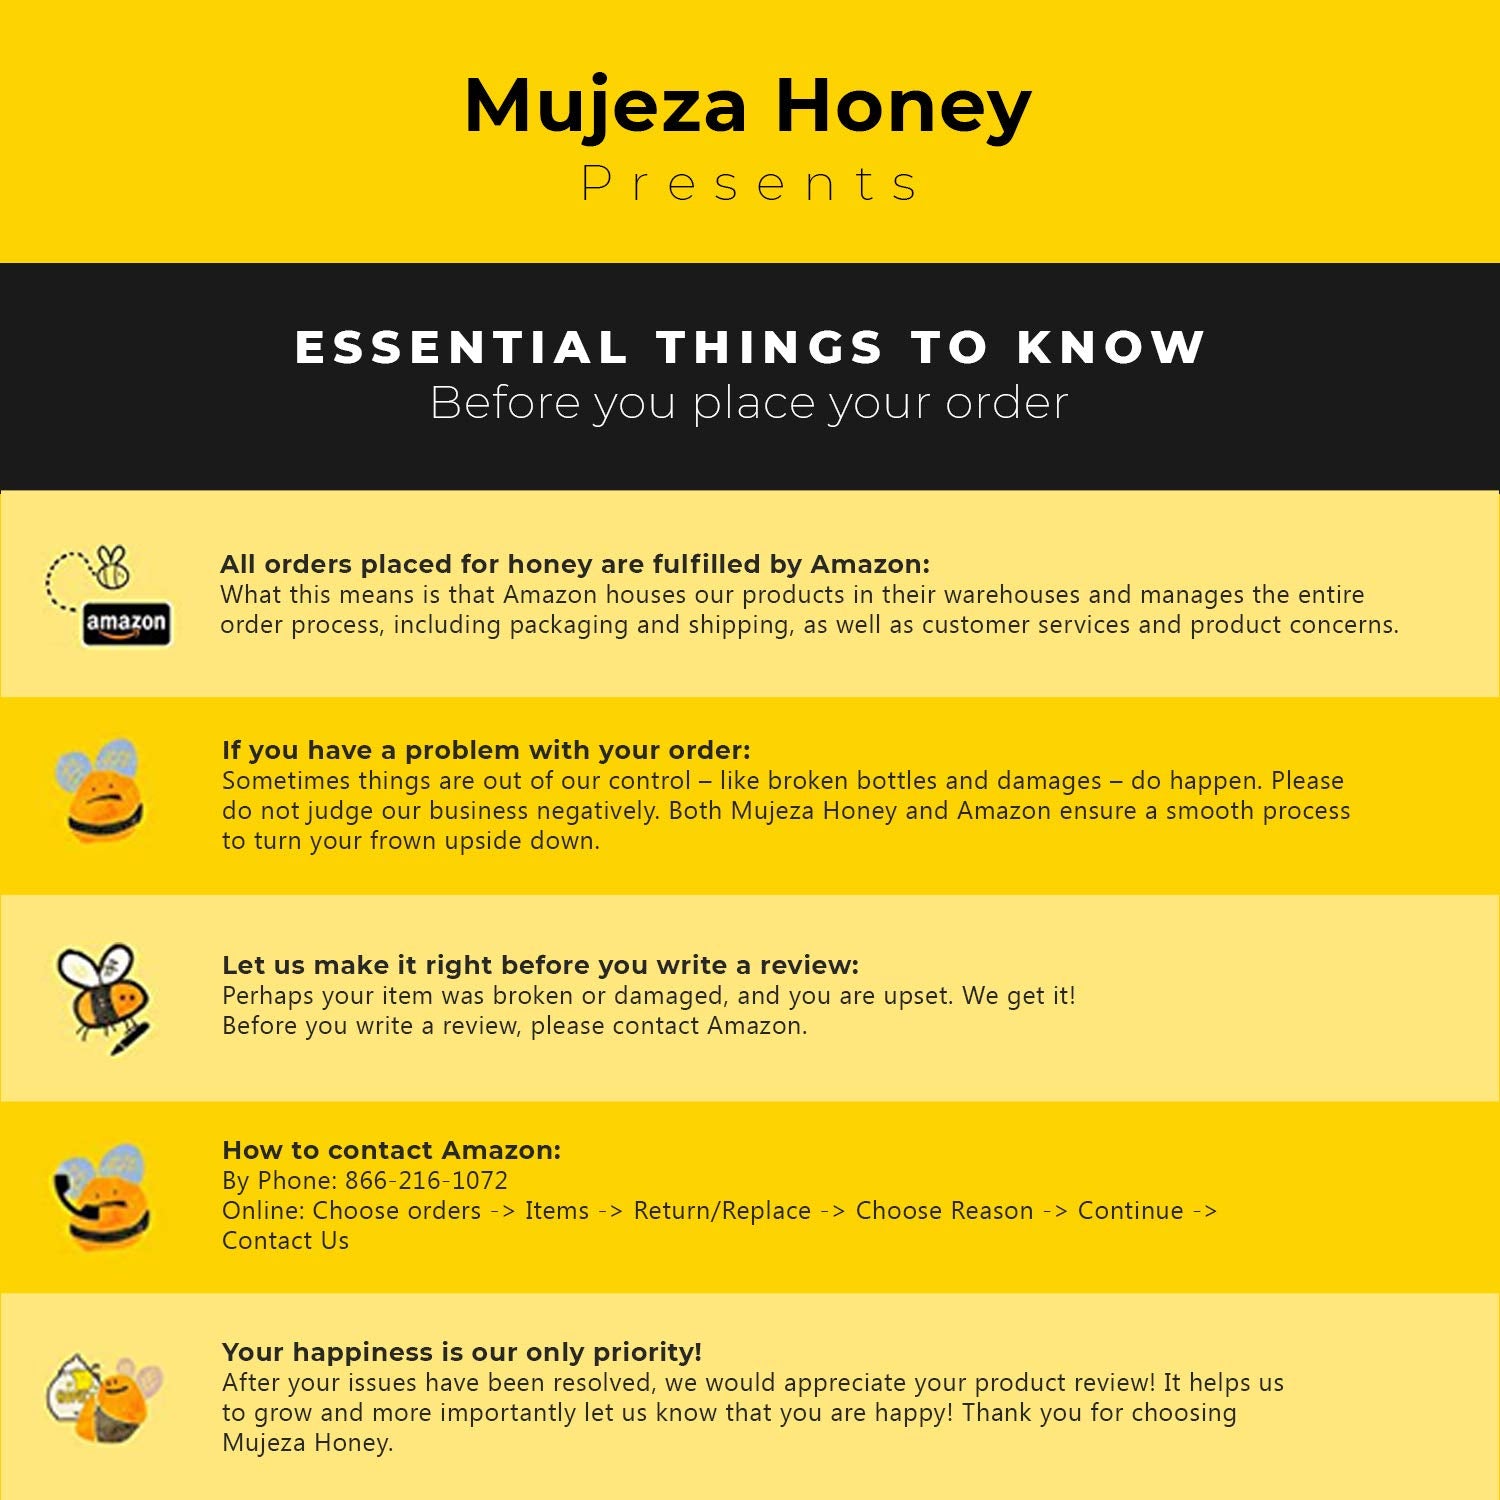 Mujeza honey - Essential Things to read about before placing your order from our store - Mujeza Honey